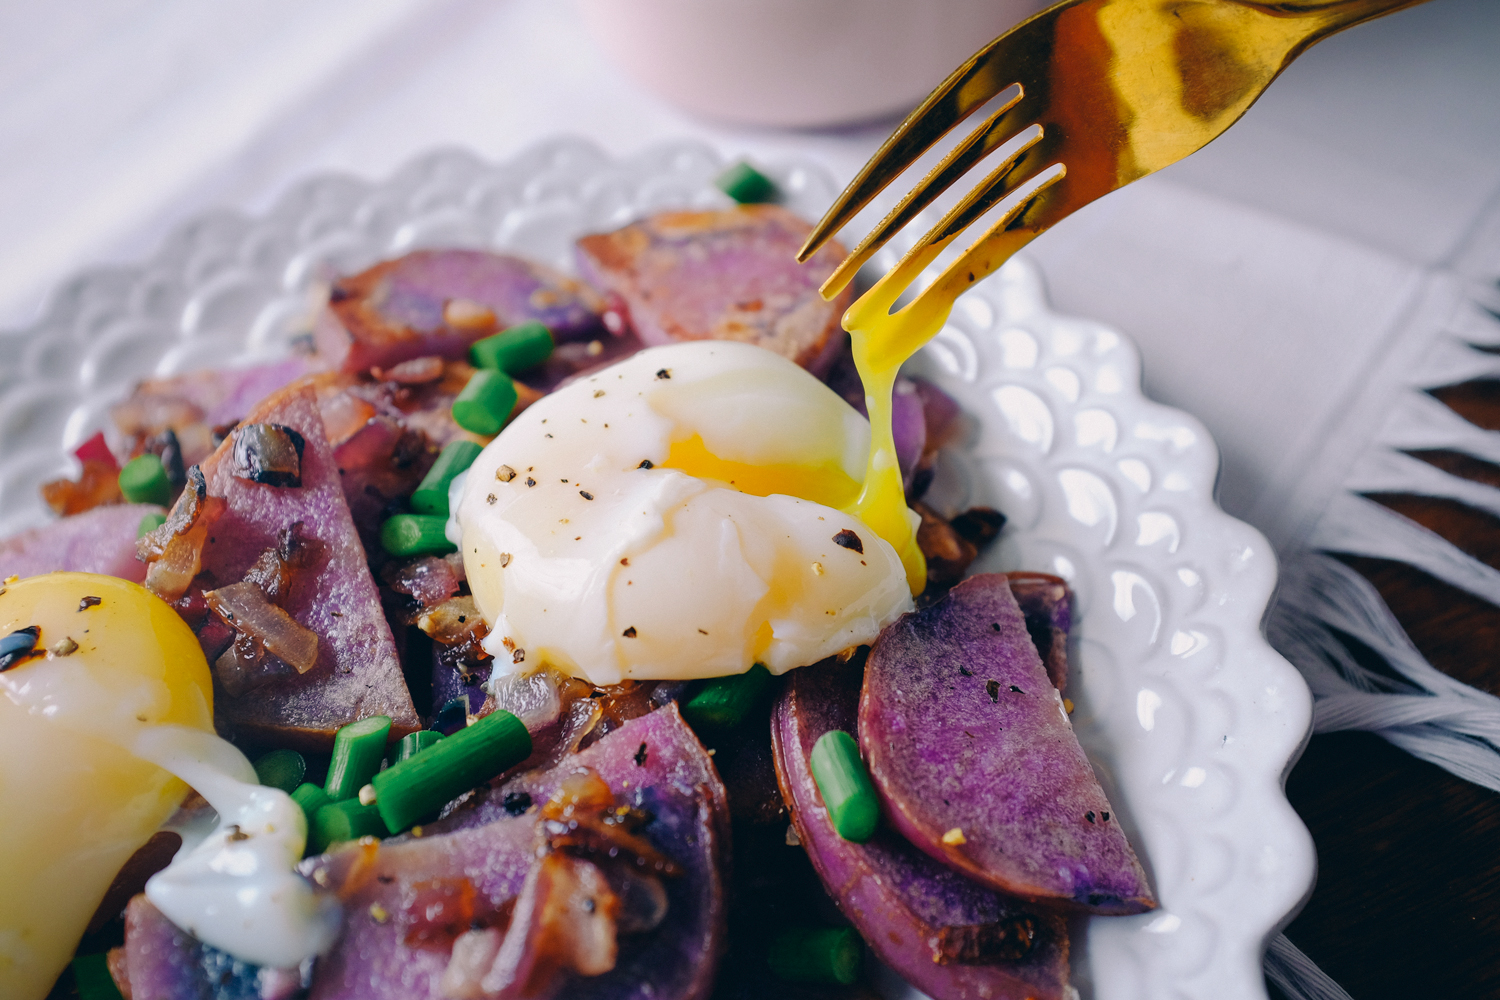 On Blue Potatoes and 62C Poached Eggs